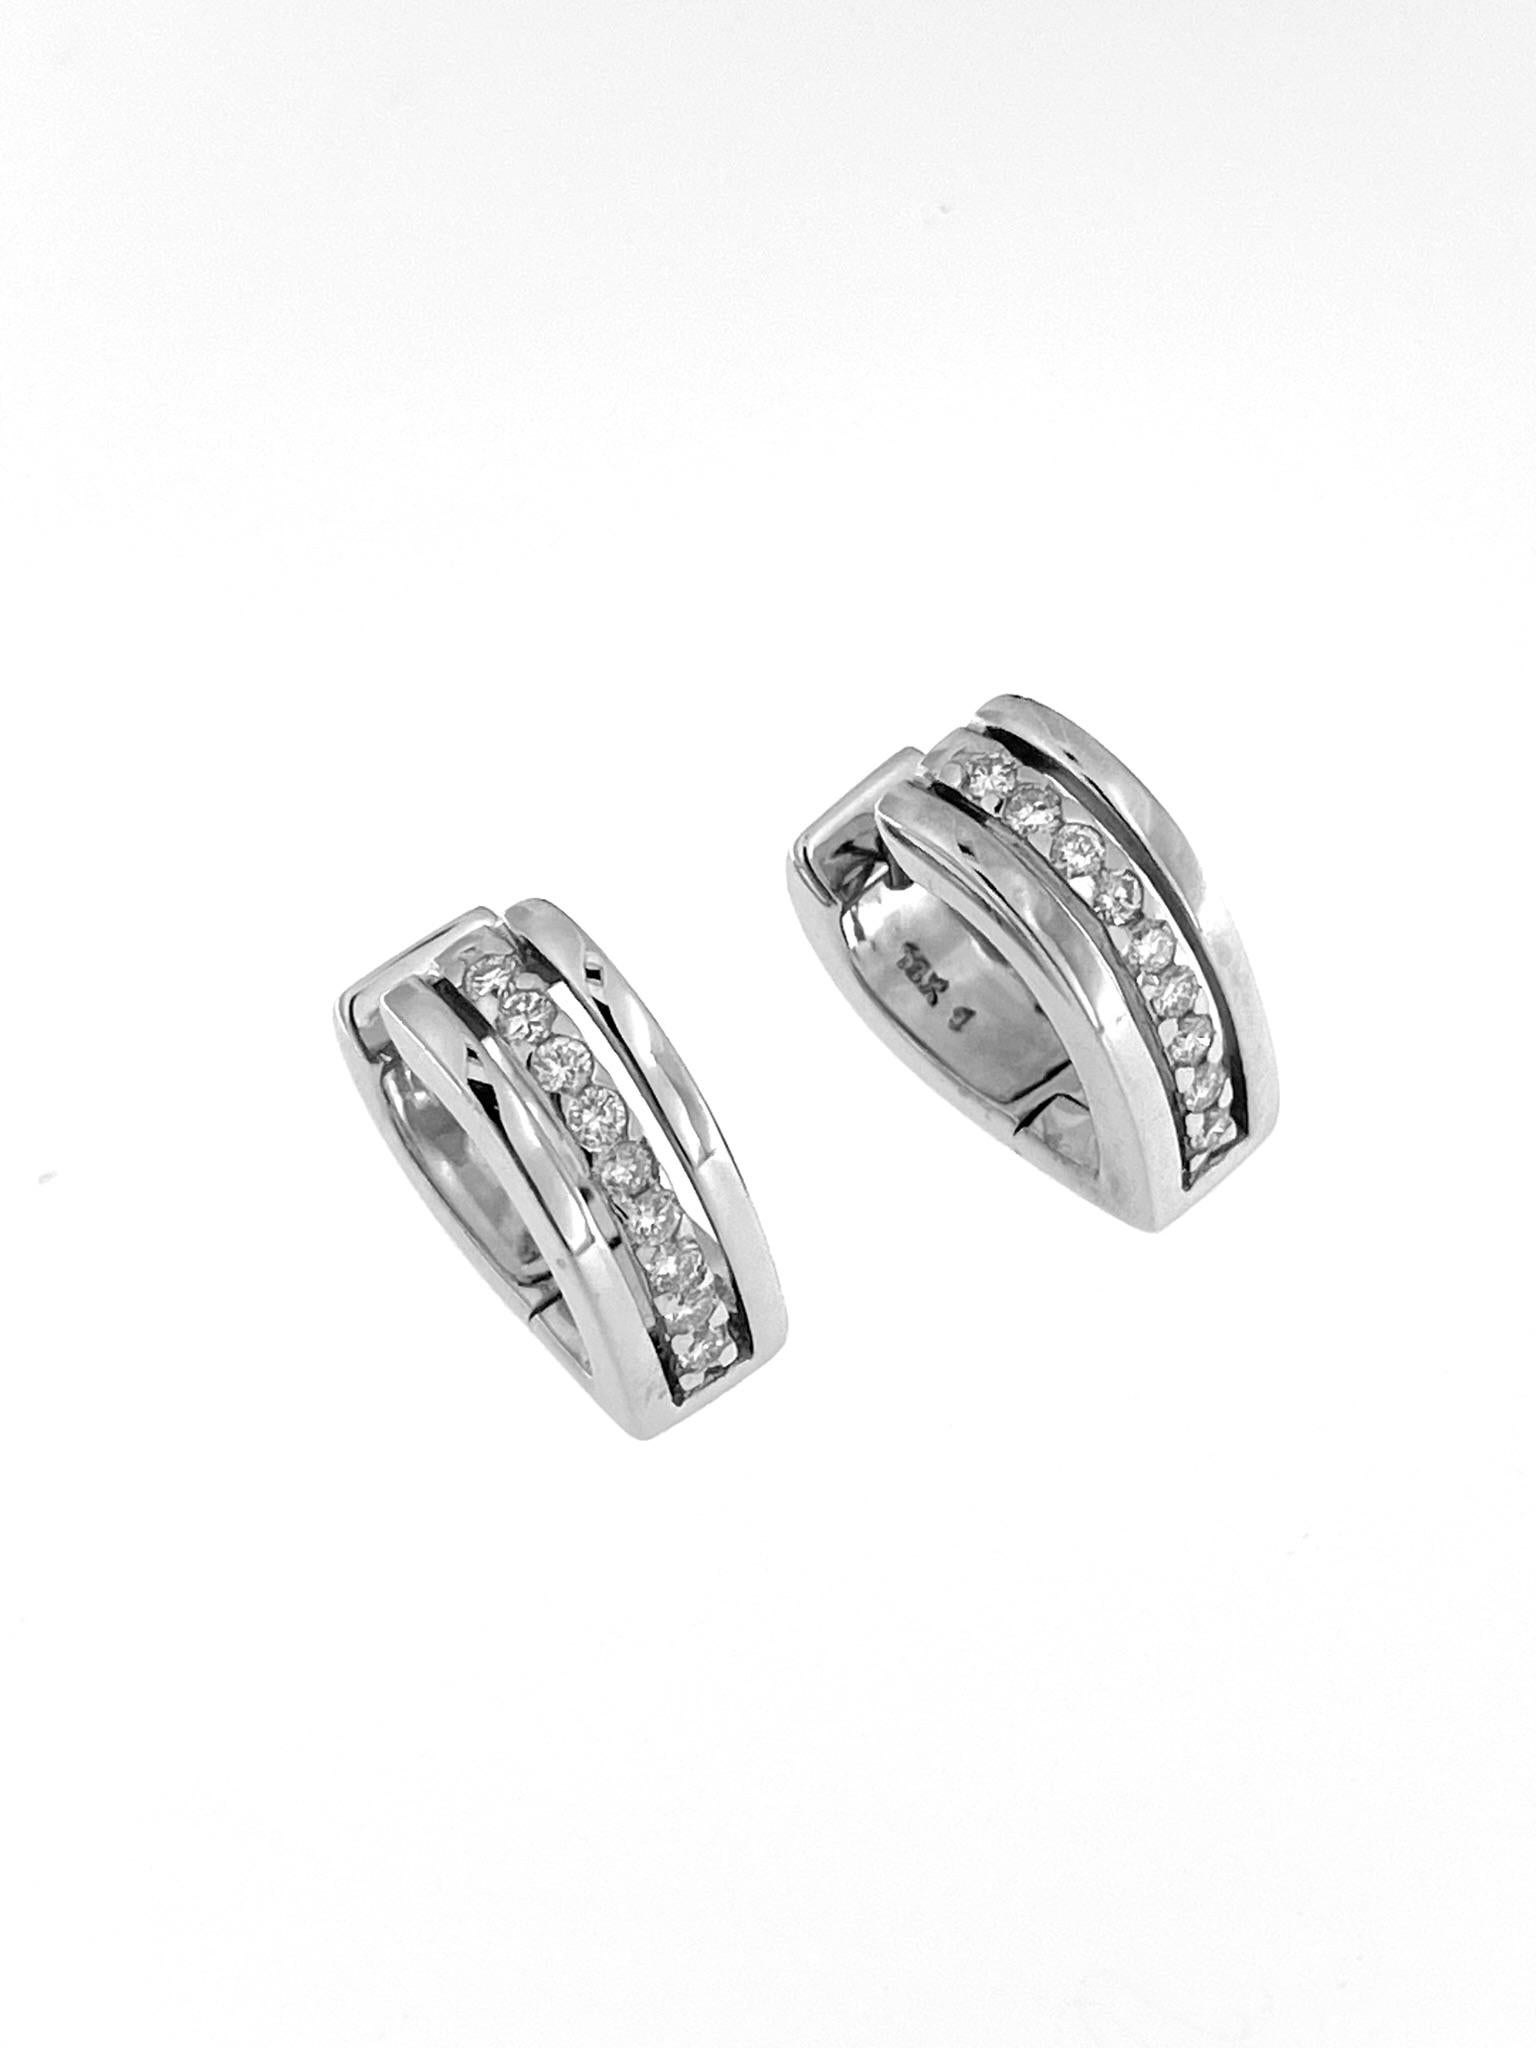 The Vintage 18-karat White Gold French Earrings with Diamonds are a timeless and sophisticated pair of earrings that showcase the enduring beauty of vintage design. Crafted with meticulous attention to detail, these earrings exude elegance and